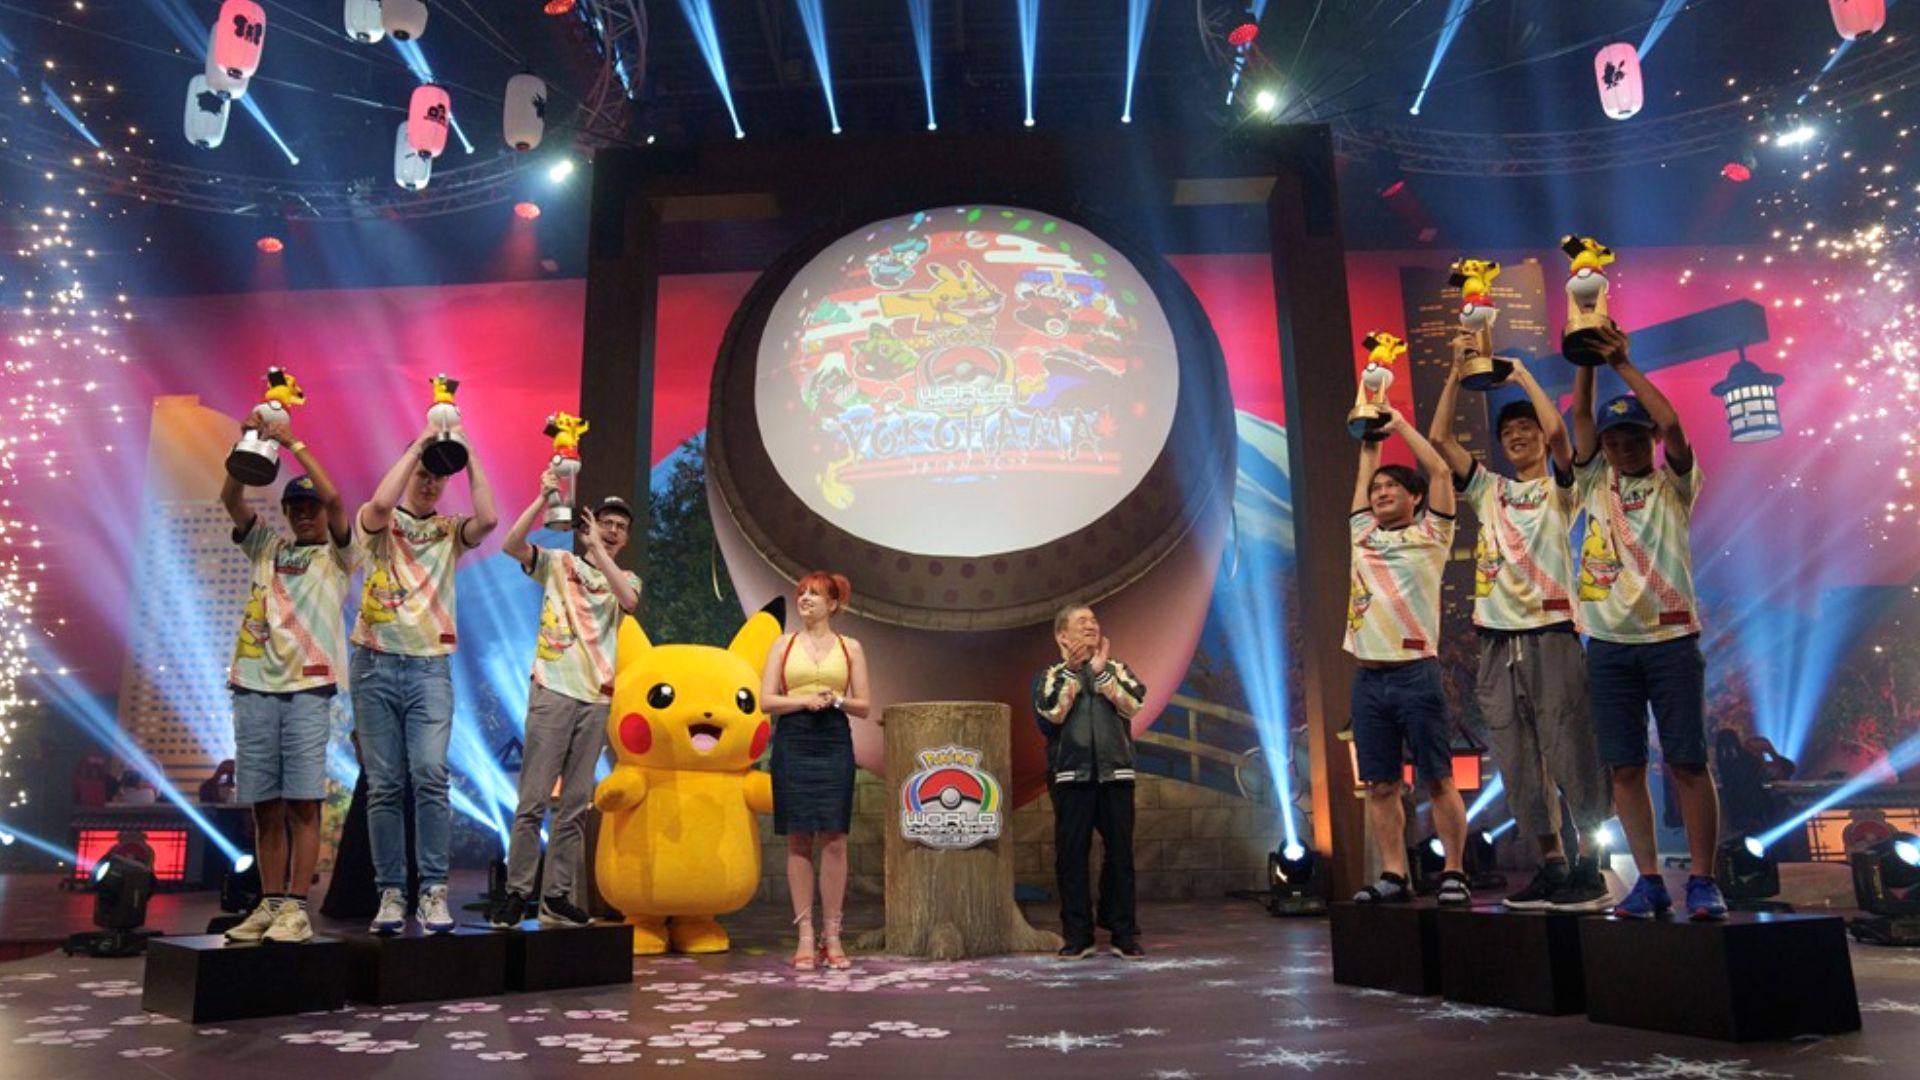 How to get Pokémon GO World Championships 2023's Timed Research